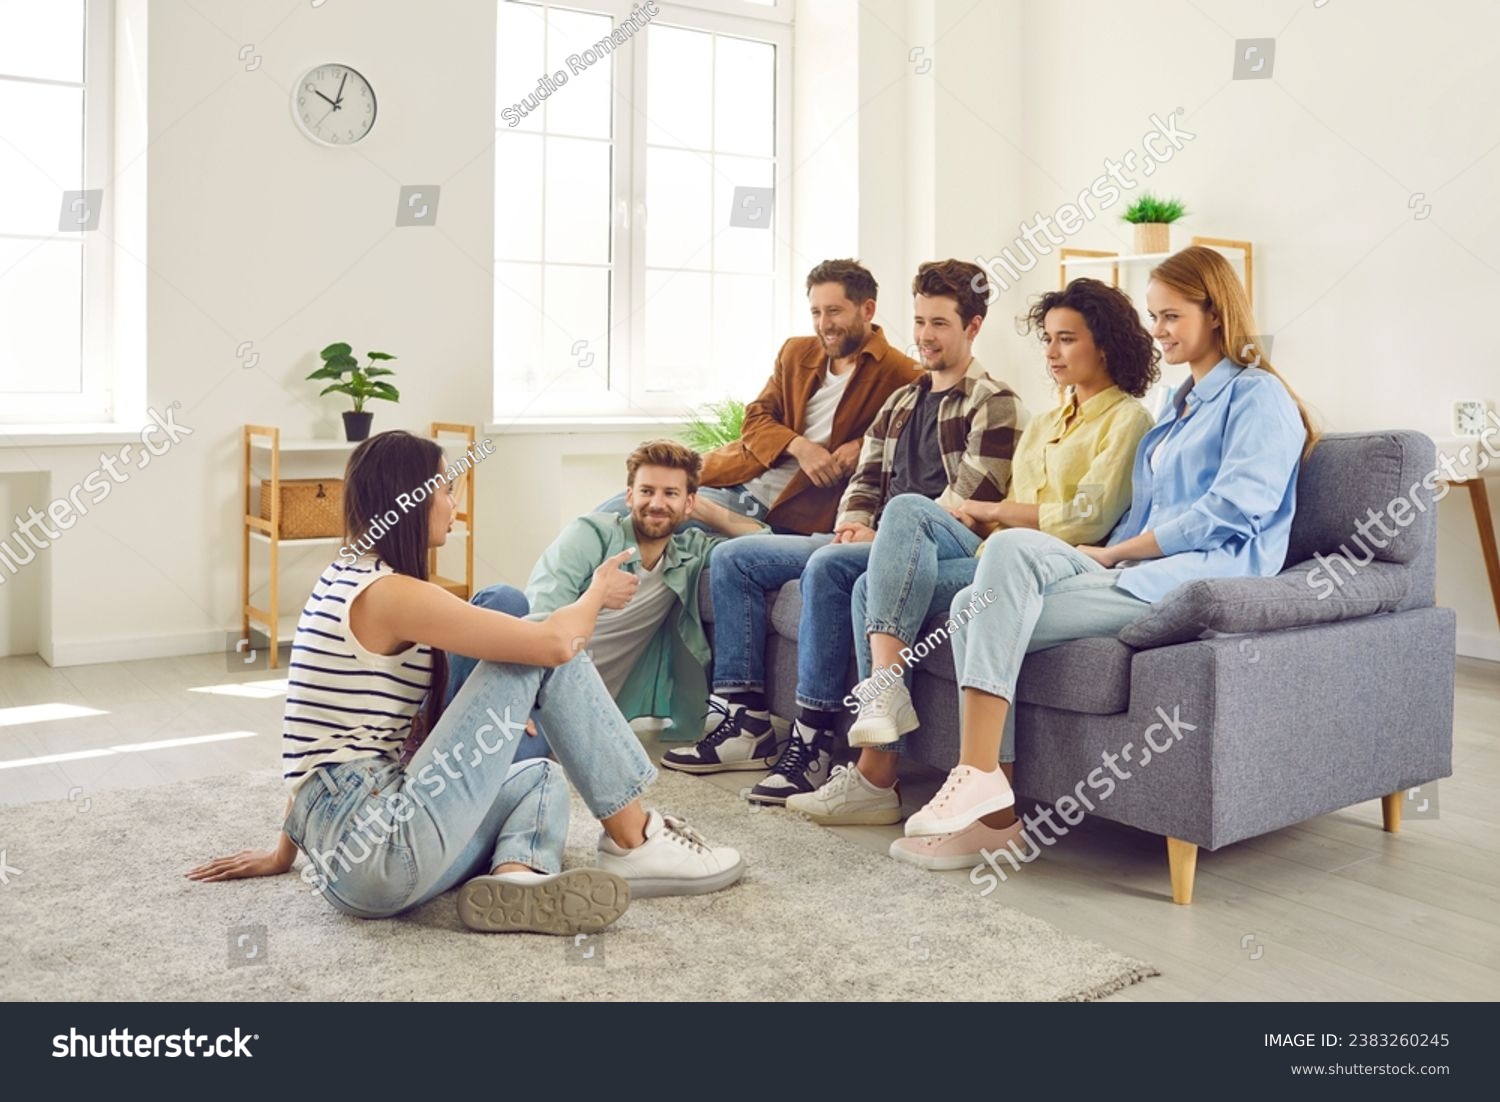 Group of friends hanging out together. Several young people meeting at somebody's place. Young men and women sitting on sofa and listening to girl who is sitting on floor and talking about something #2383260245